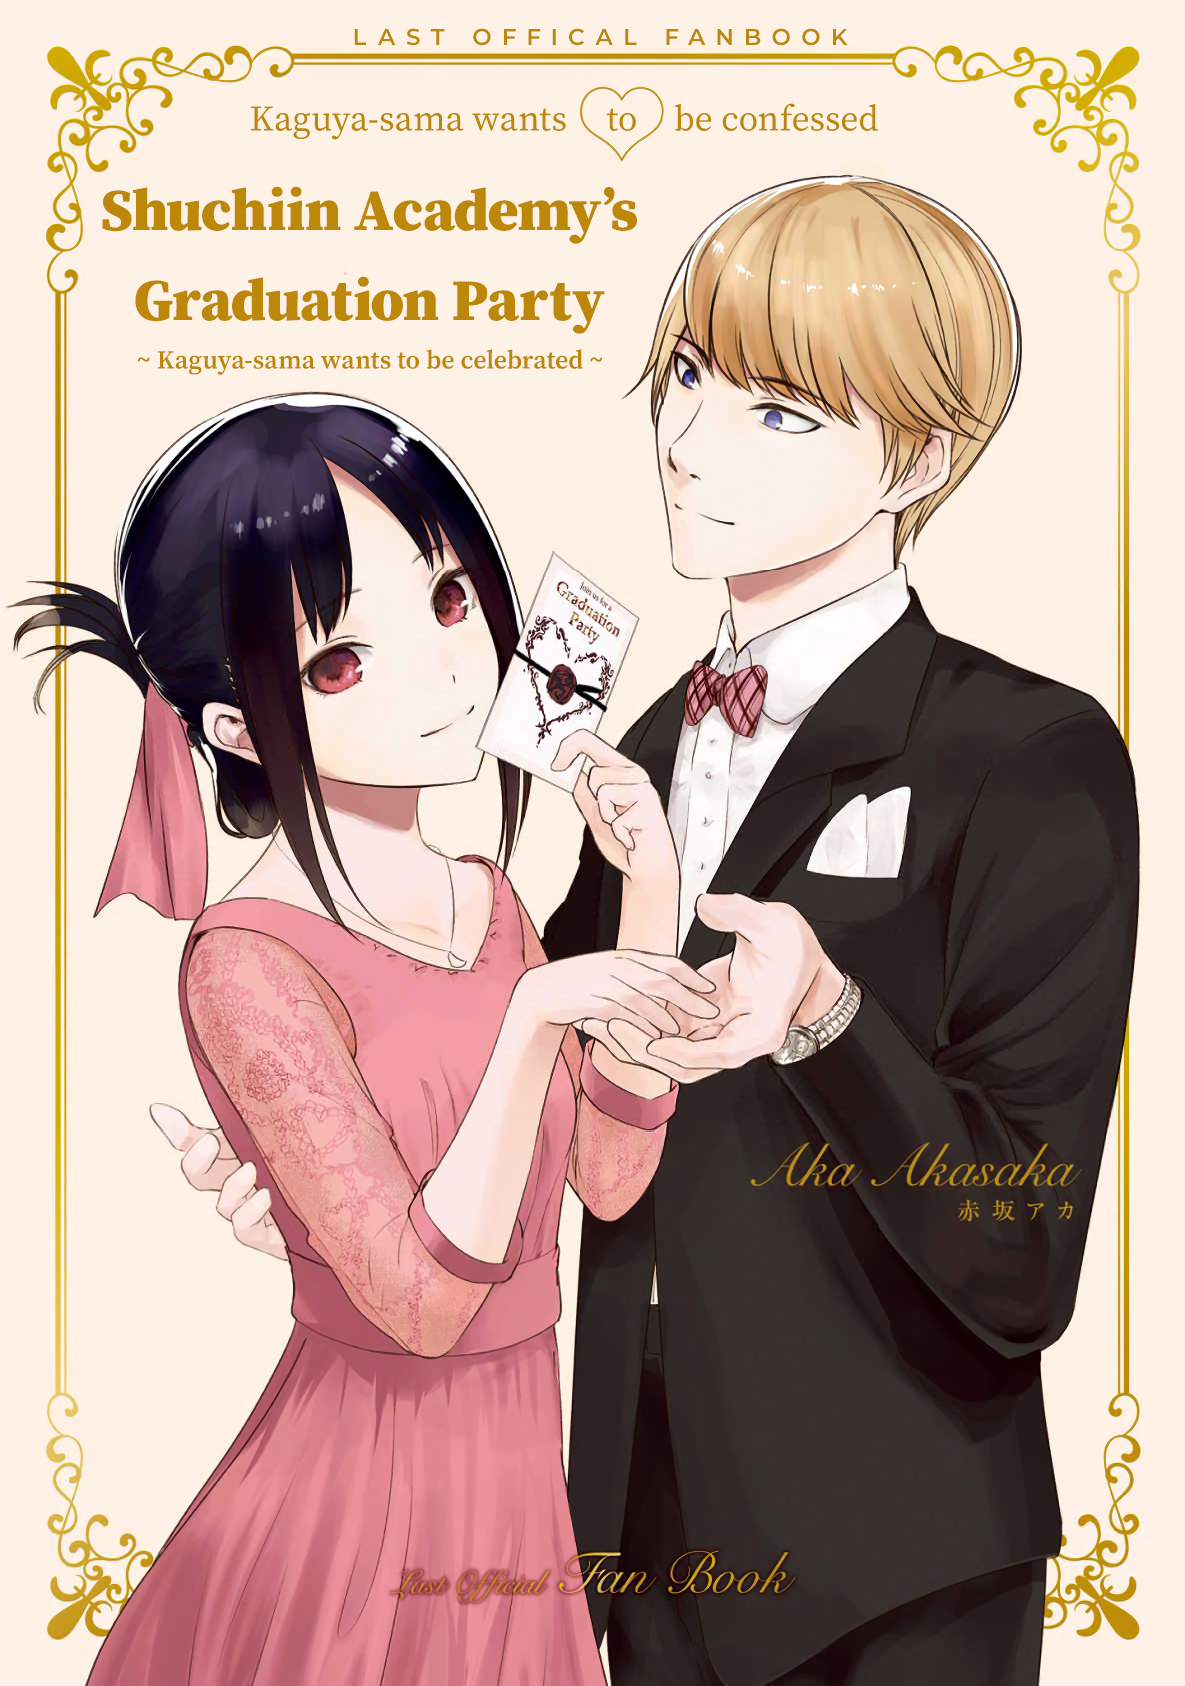 Shuchiin Academy’S Graduation Party ~Kaguya-Sama Wants To Be Celebrated~: Last Official Fanbook - Page 1